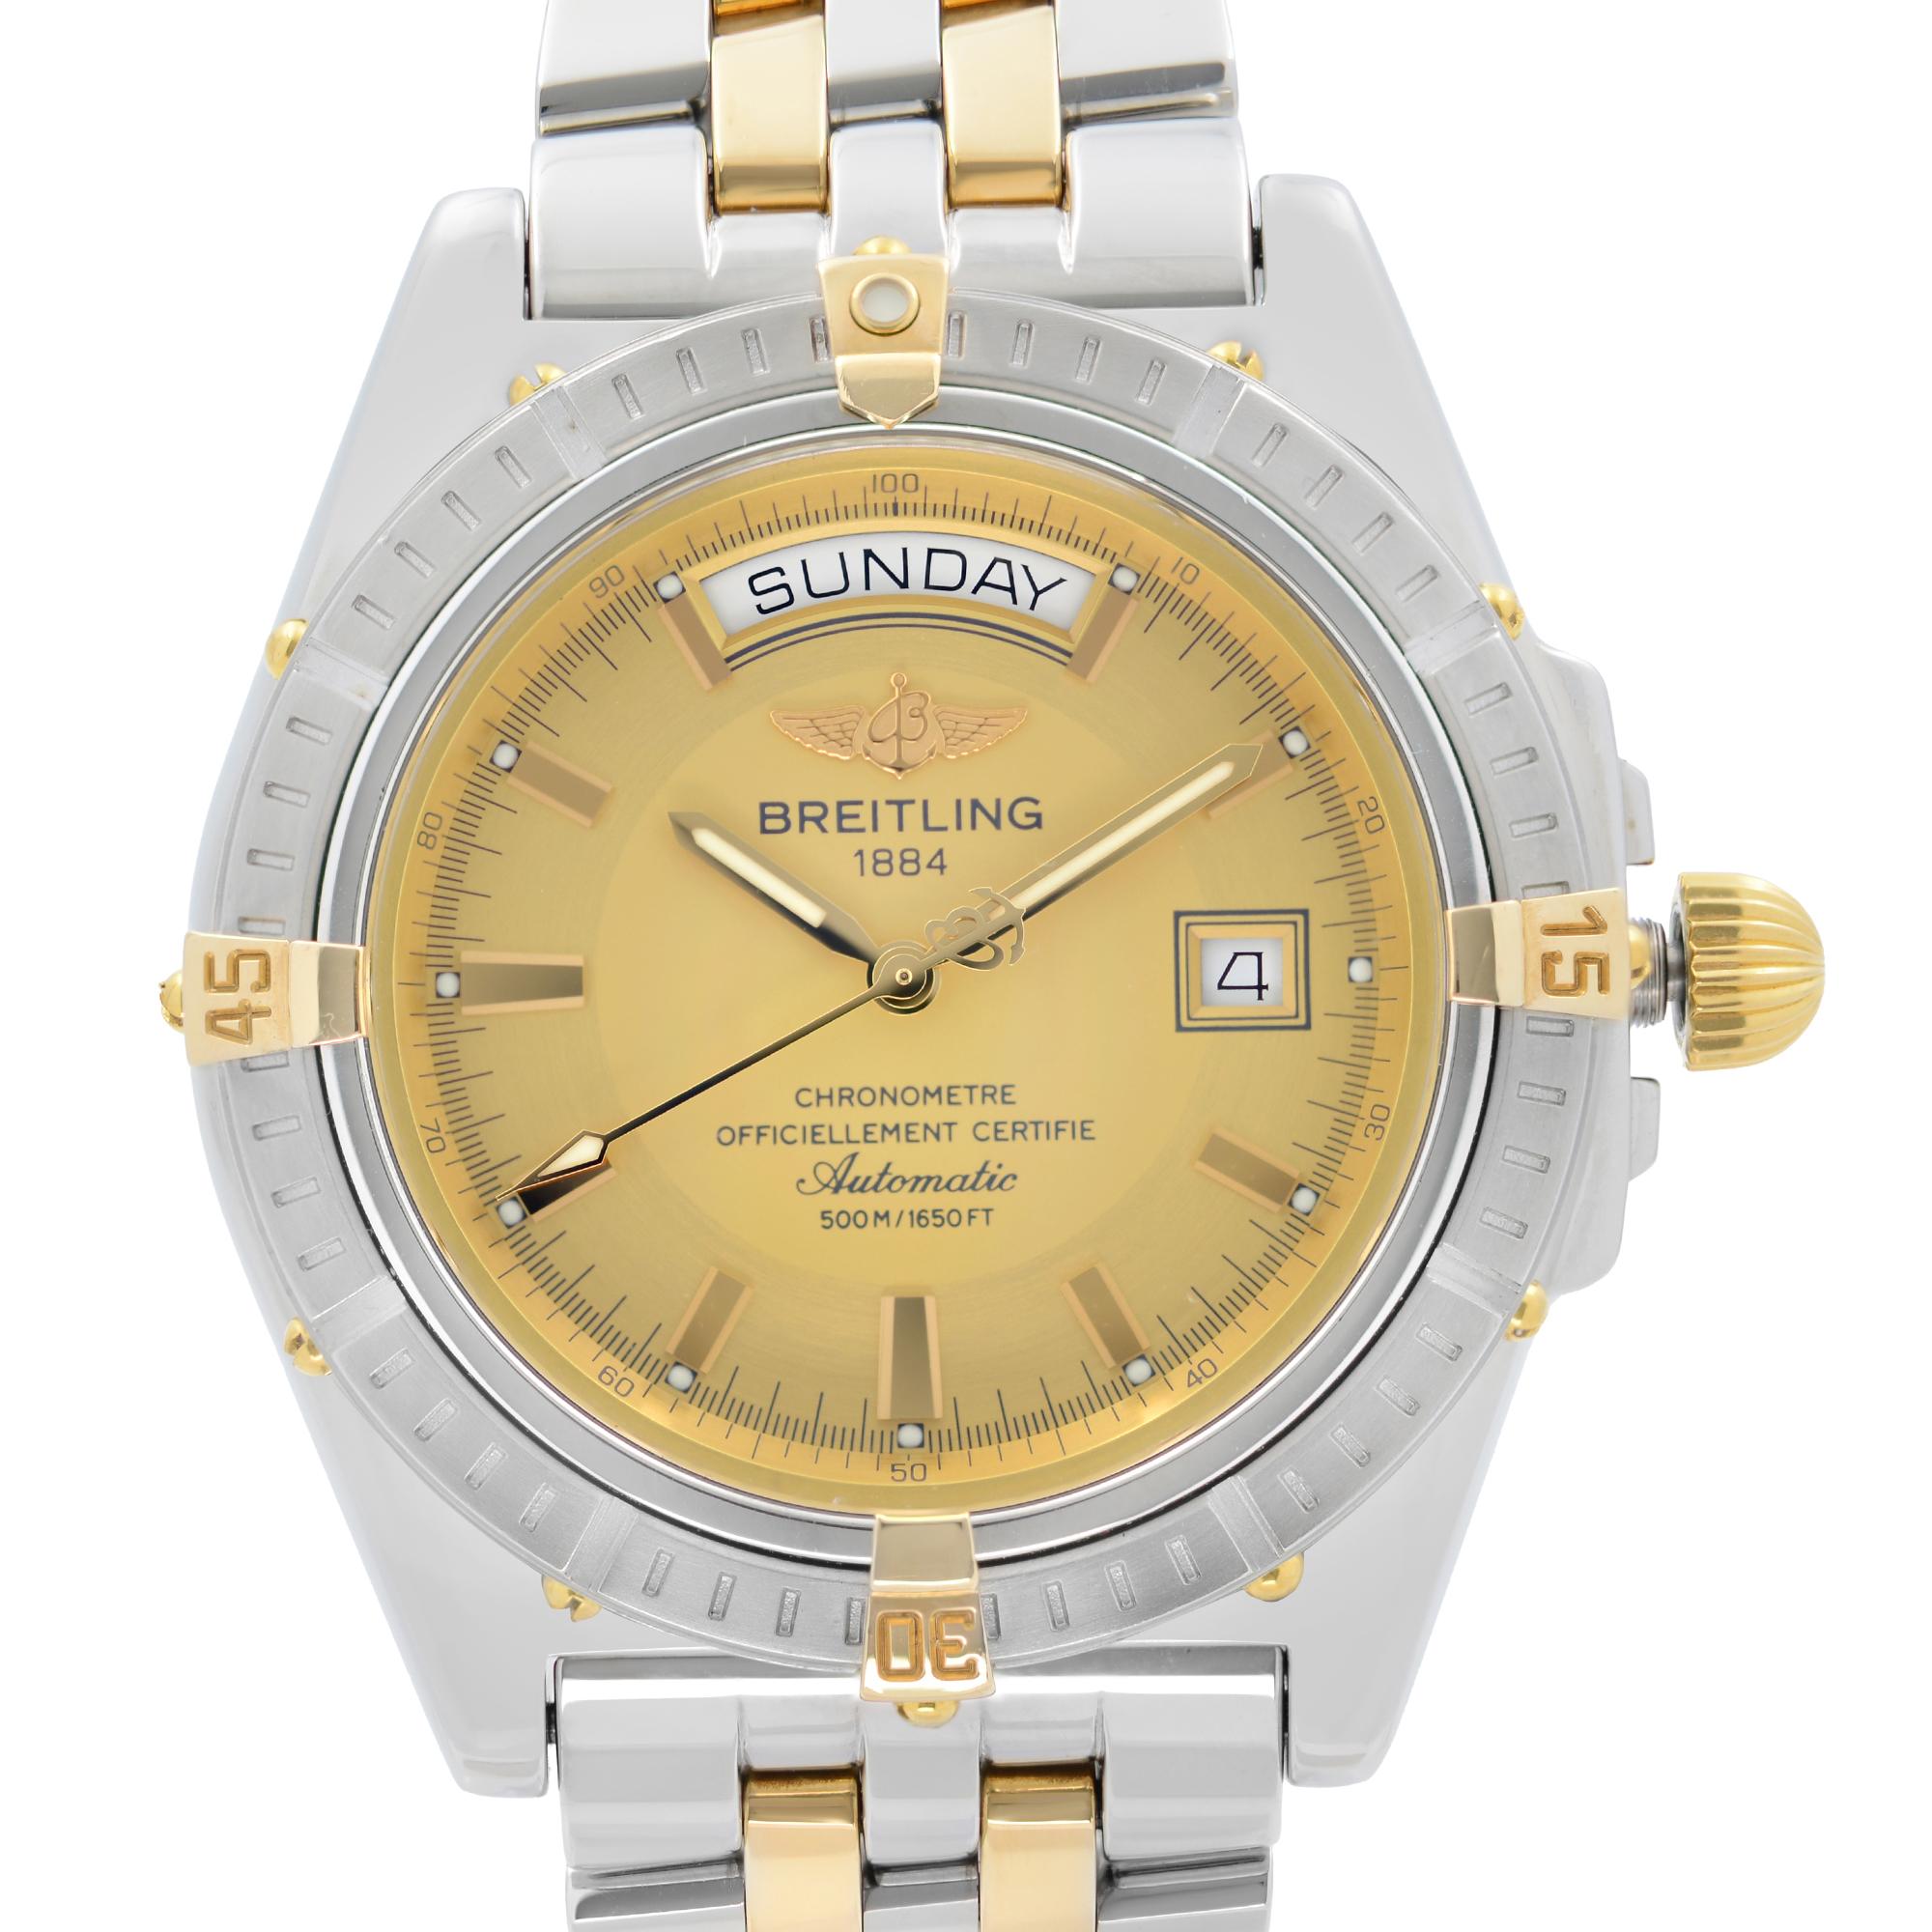 Pre-owned Like New Breitling Headwind Gold Plated Steel Champagne Dial Automatic Men's Watch B45355. 18K Yellow gold Bezel riders. Gold plated Two-Tone bracelet.  This Beautiful Timepiece Features: Stainless Steel Case with a Gold Plated Stainless